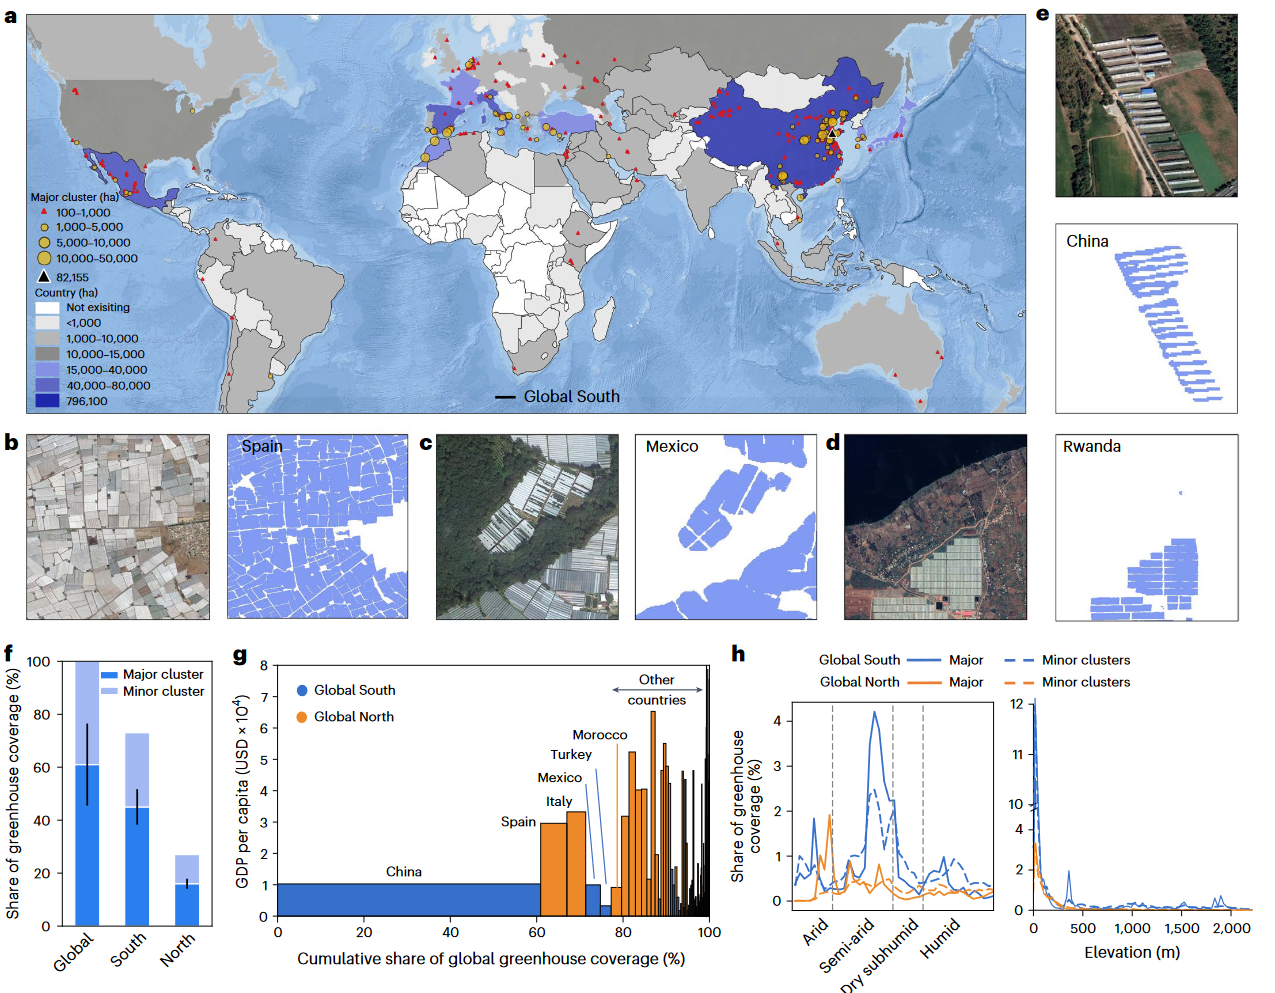 A global map of greenhouse cultivation highlights major and minor clusters as well as total coverage in hectares (ha)